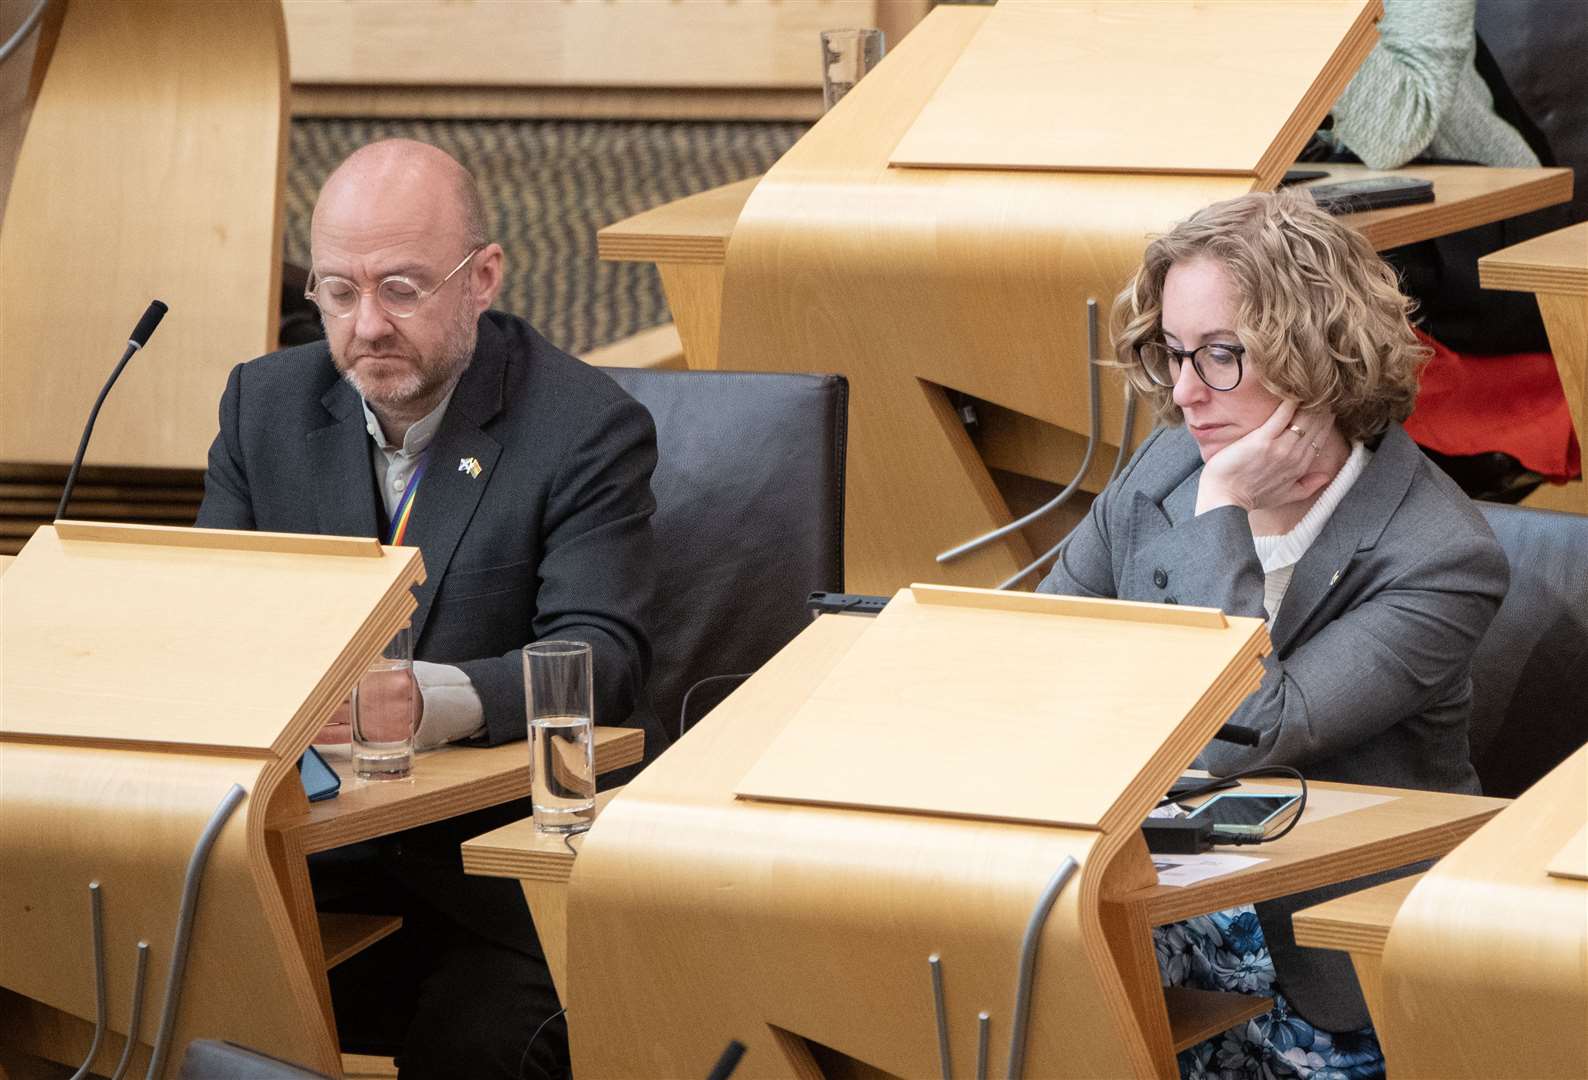 Scottish Green co-leaders Patrick Harvie and Lorna Slater confirmed their party will vote against Humza Yousaf in a vote of no confidence (Lesley Martin/PA)